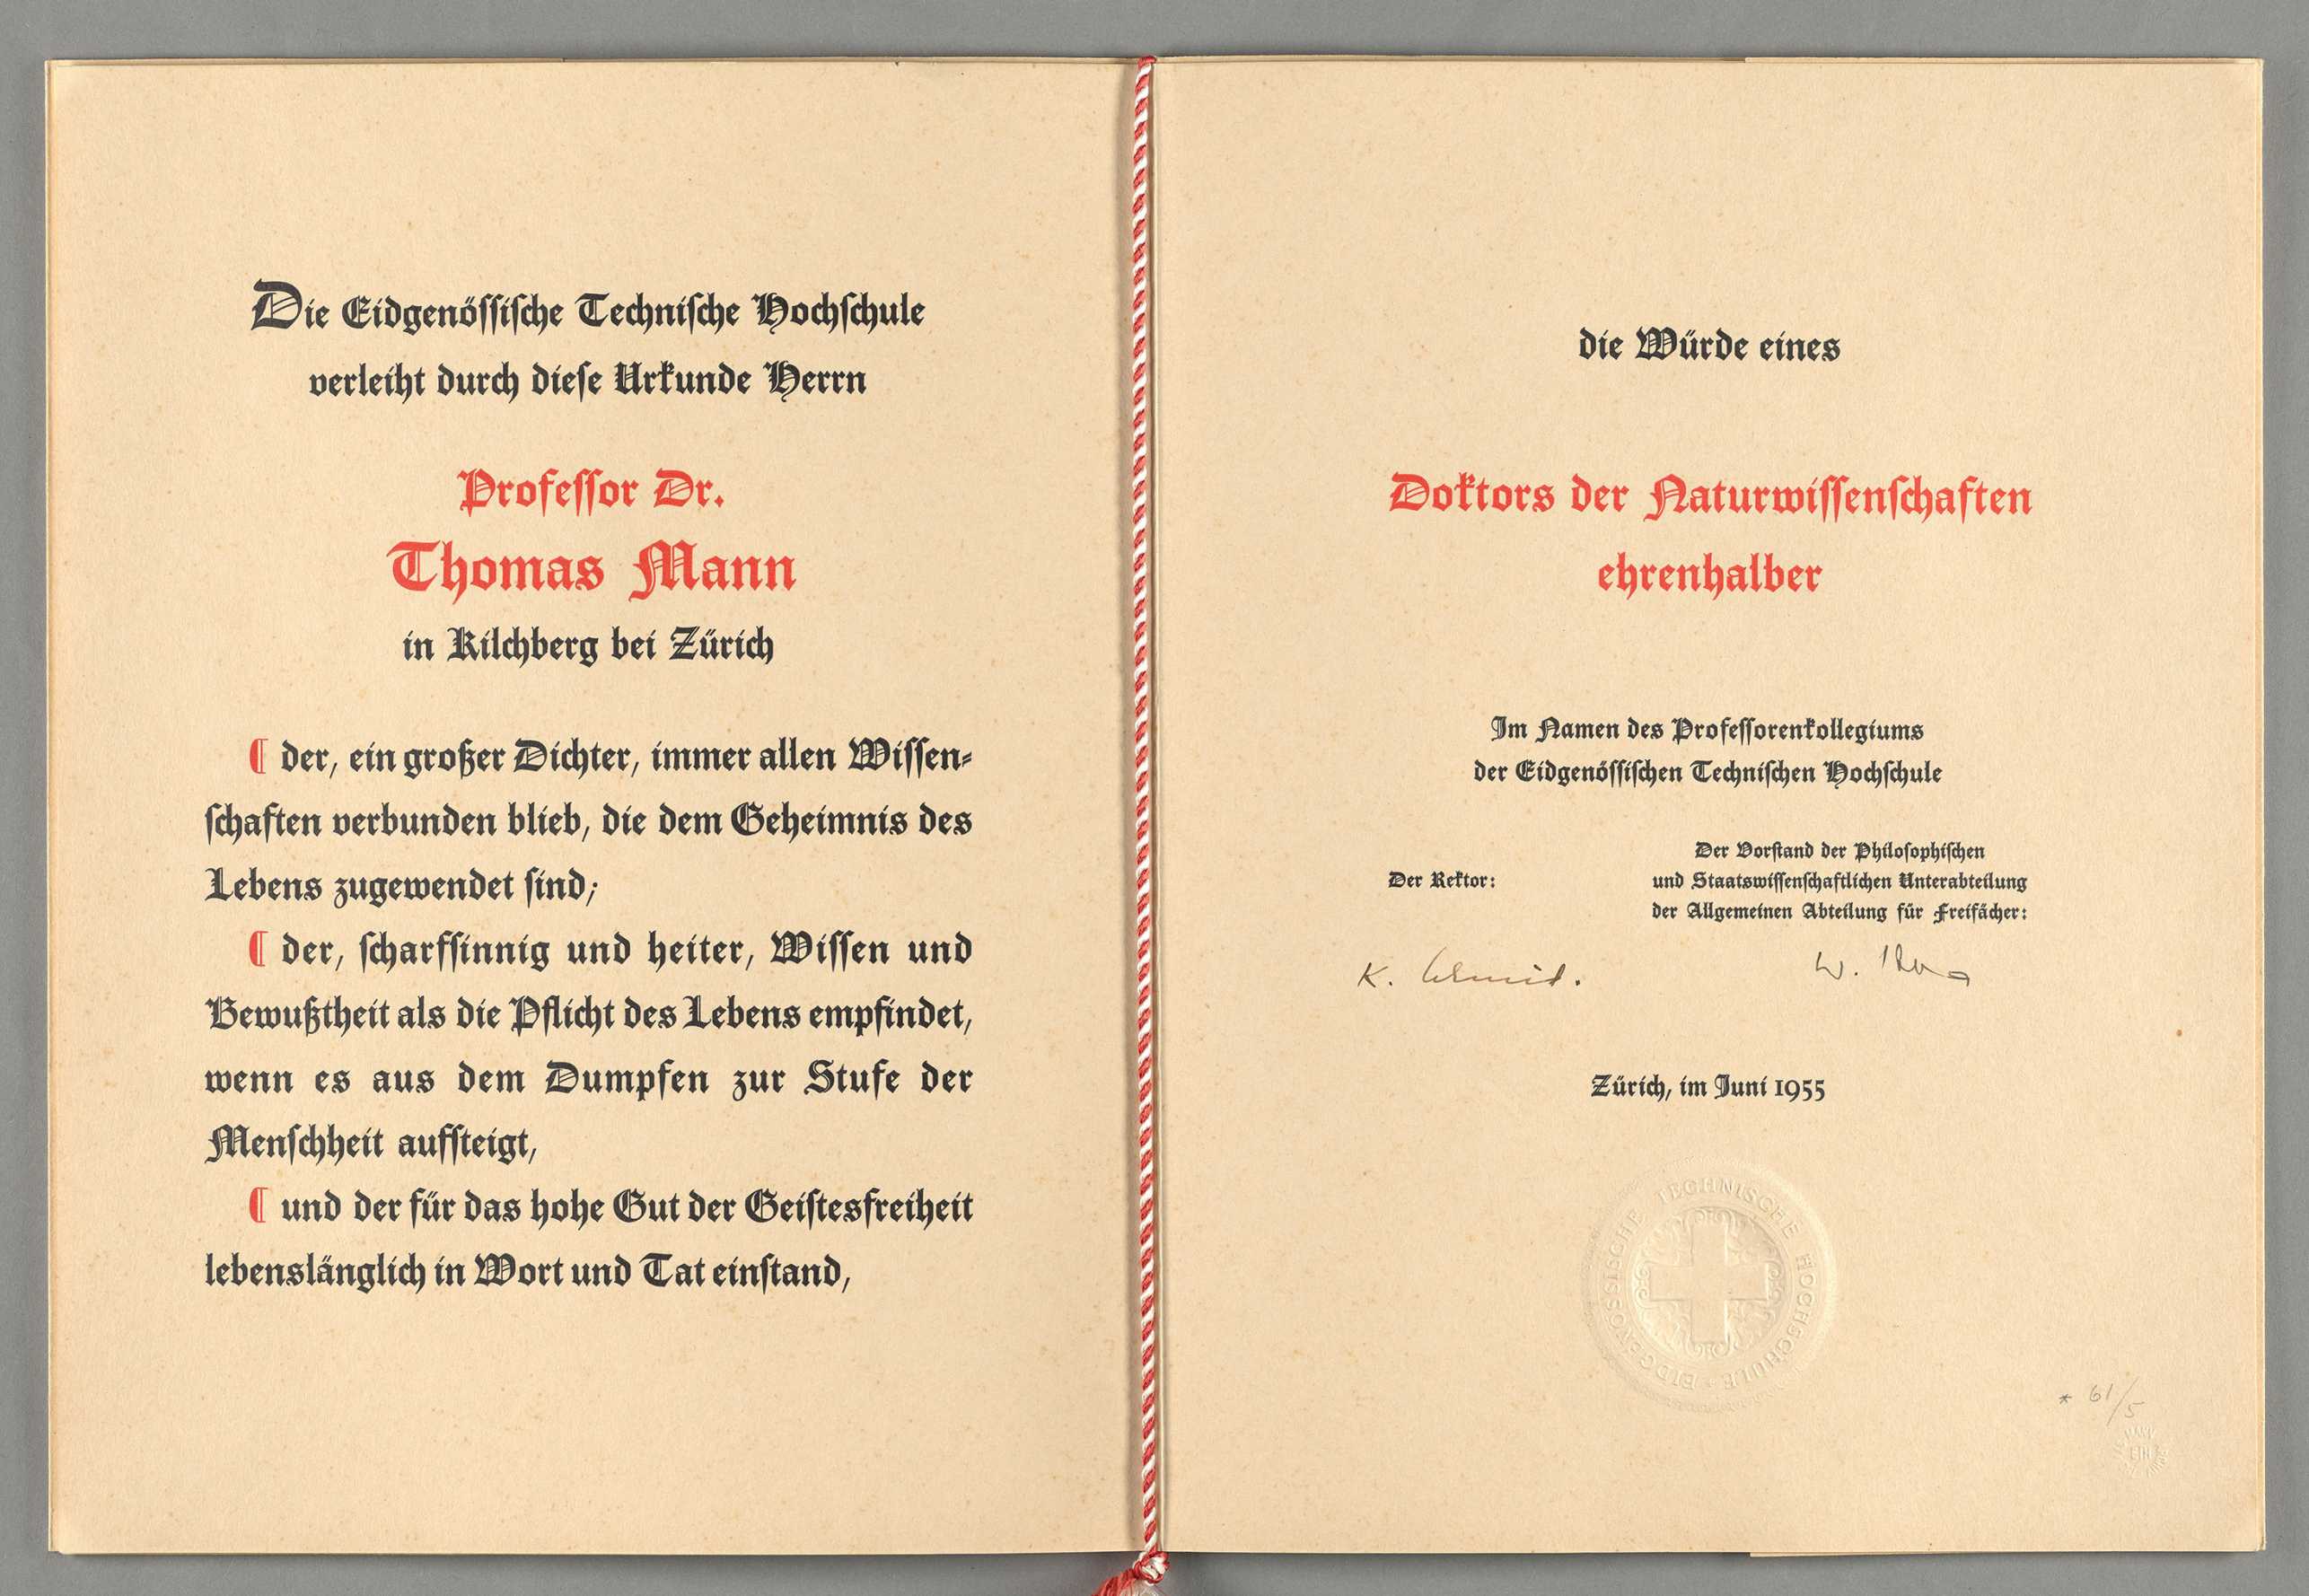 Enlarged view: The honorary doctorate certificate of Thomas Mann